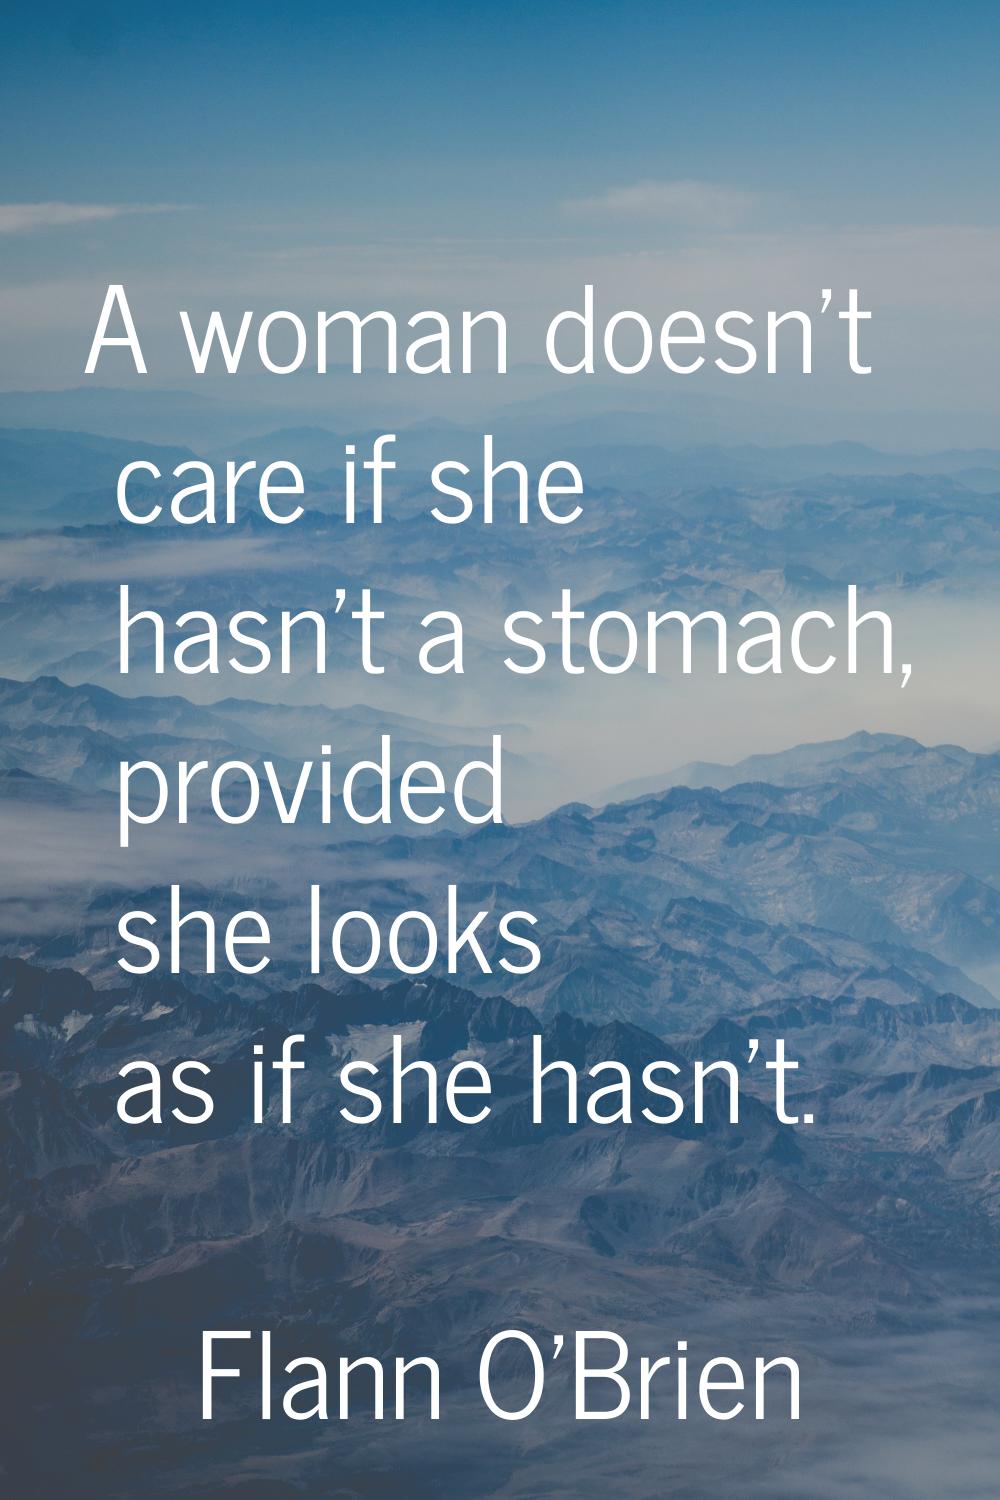 A woman doesn't care if she hasn't a stomach, provided she looks as if she hasn't.